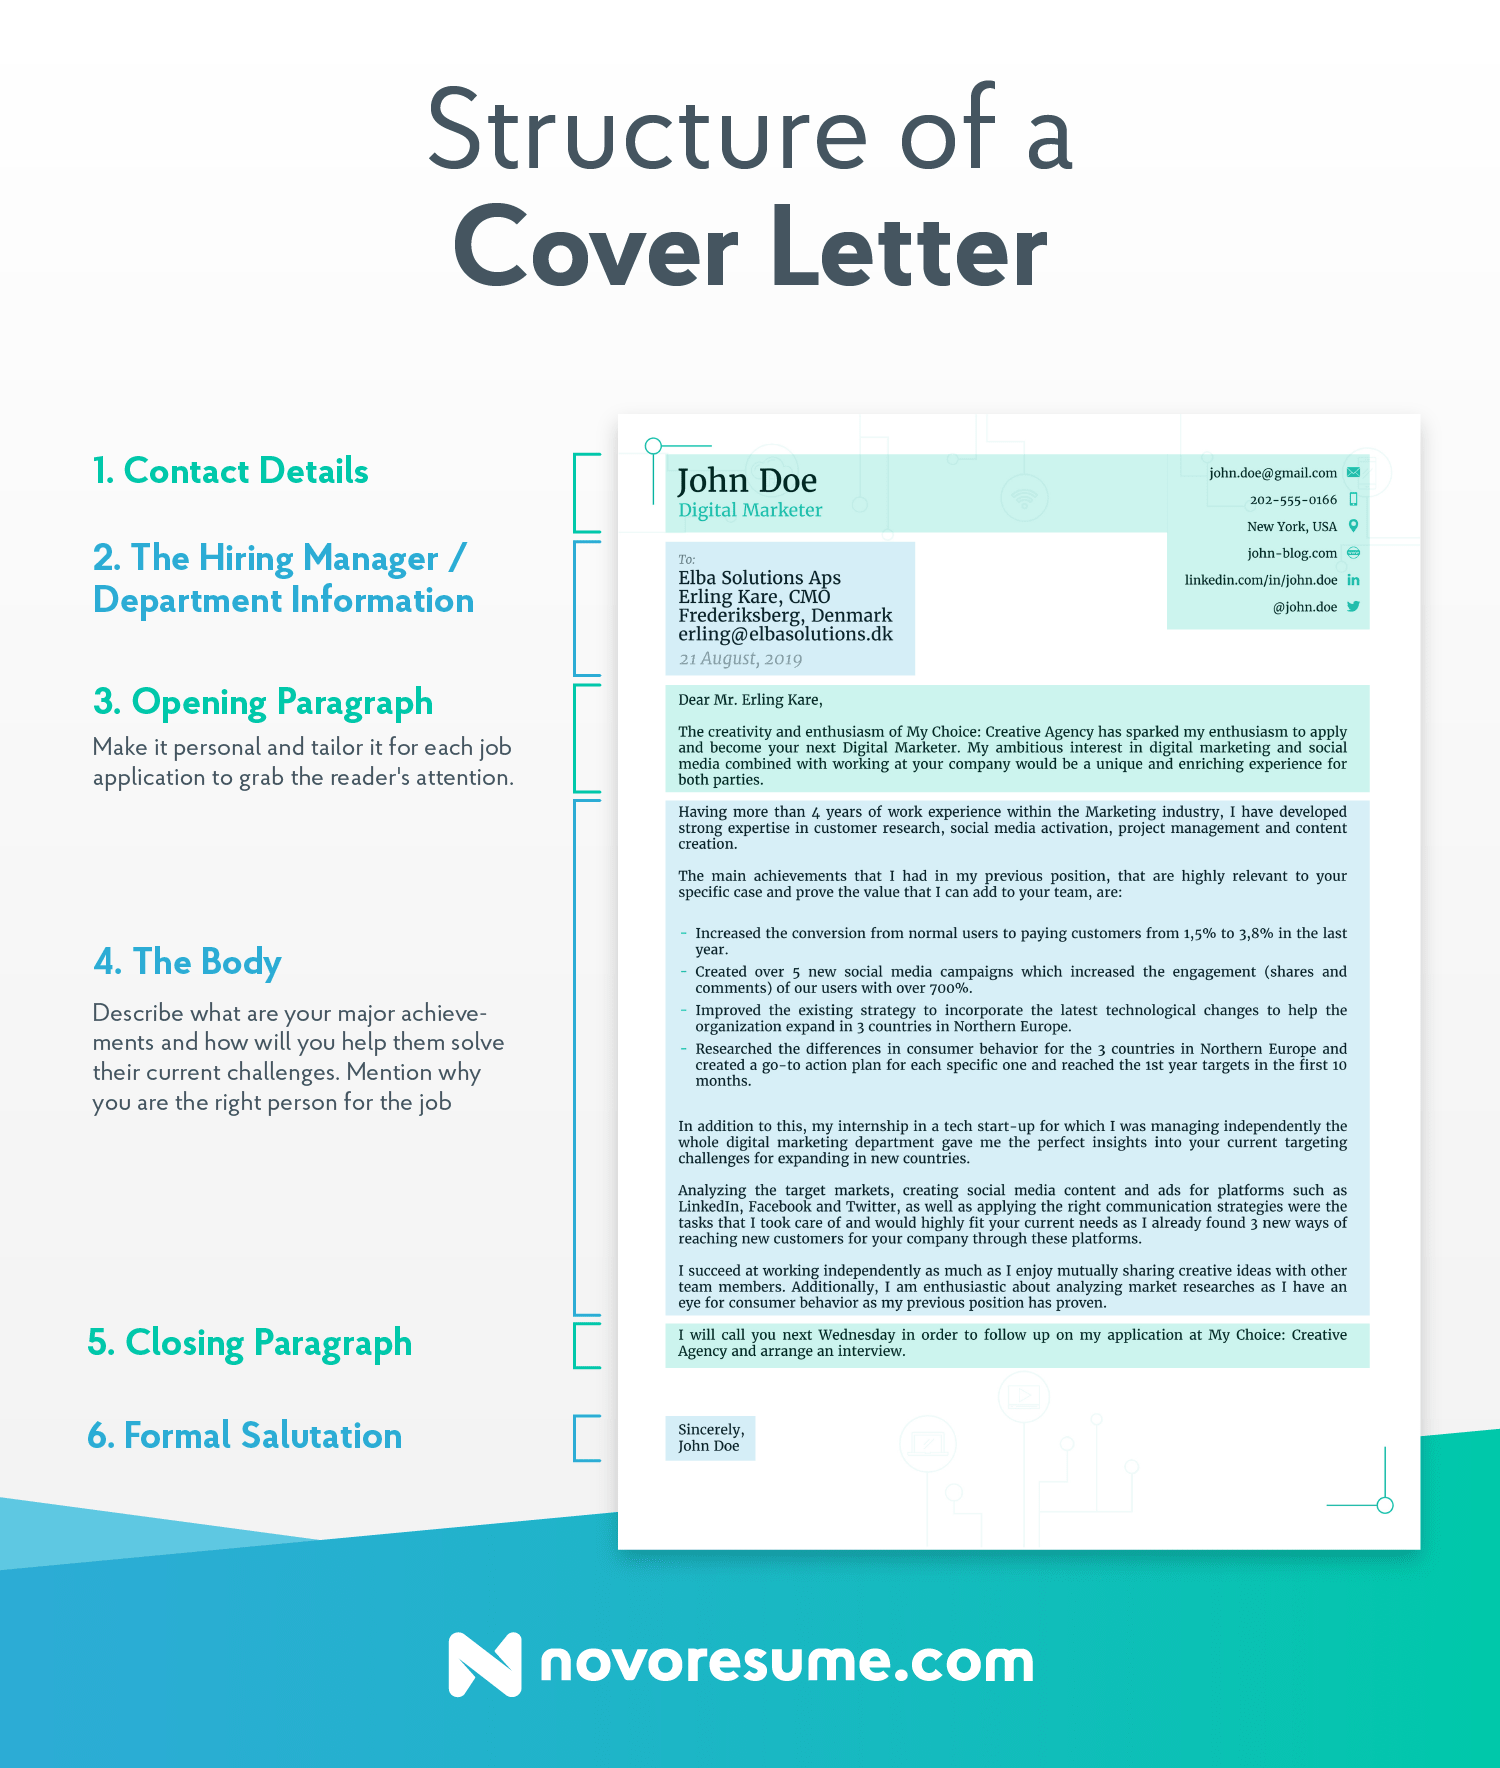 structure of a cover letter software engineering